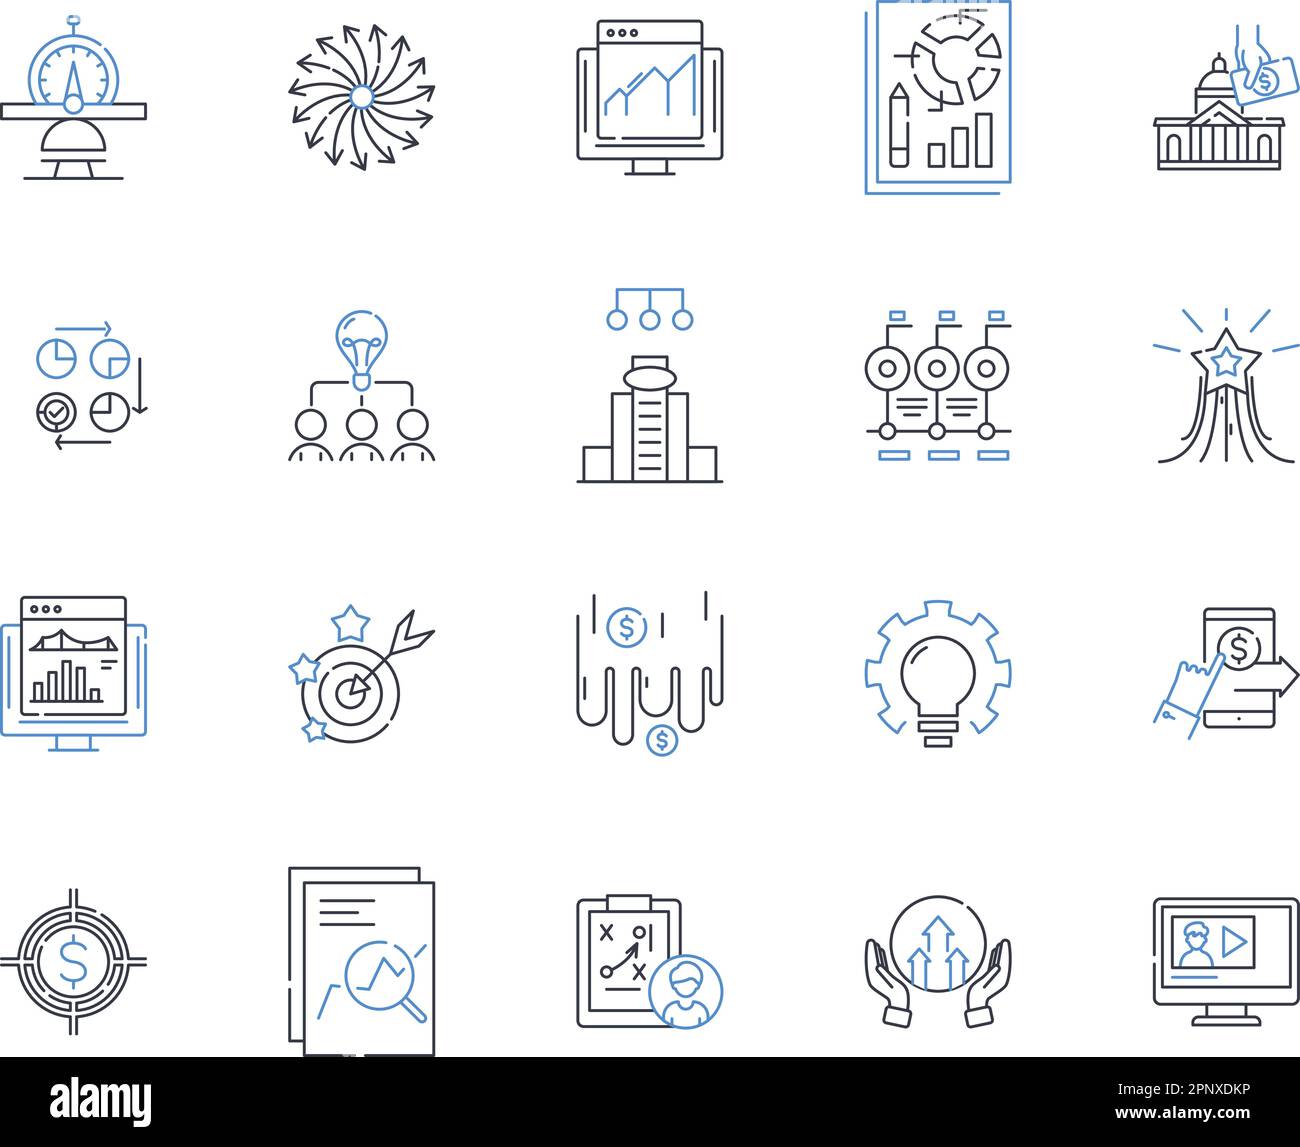 Framework and model line icons collection. Architecture, Blueprint, Construction, Design, Framework, Infrastructure, Model vector and linear Stock Vector